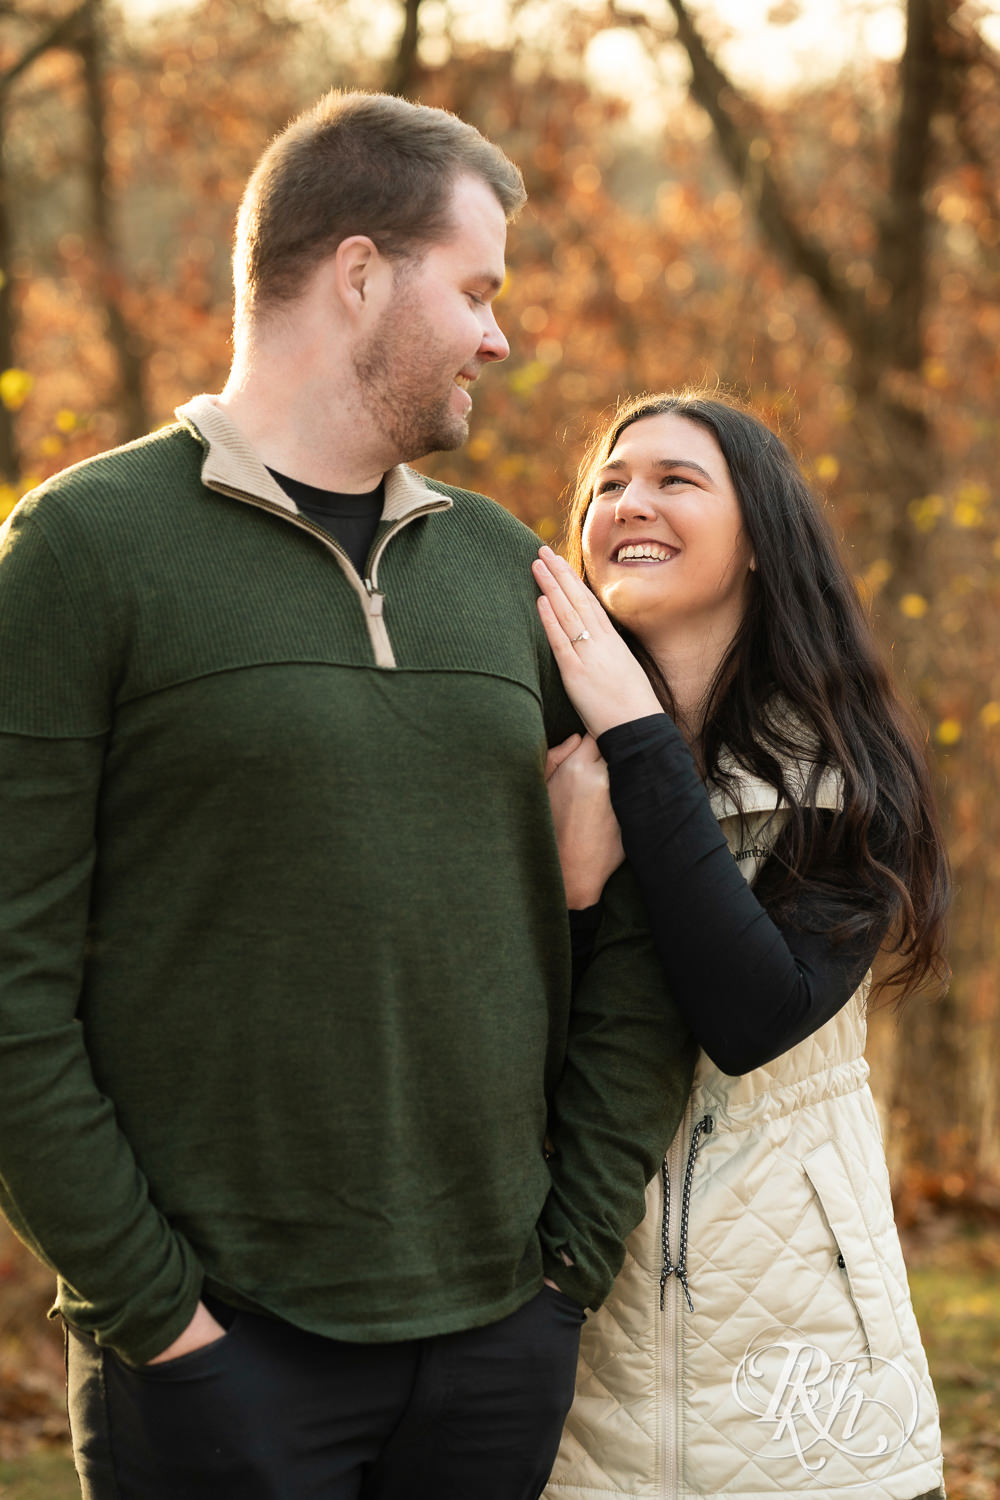 Man and woman smile at each other during chilly November engagement photography at Lebanon Hills in Eagan, Minnesota.